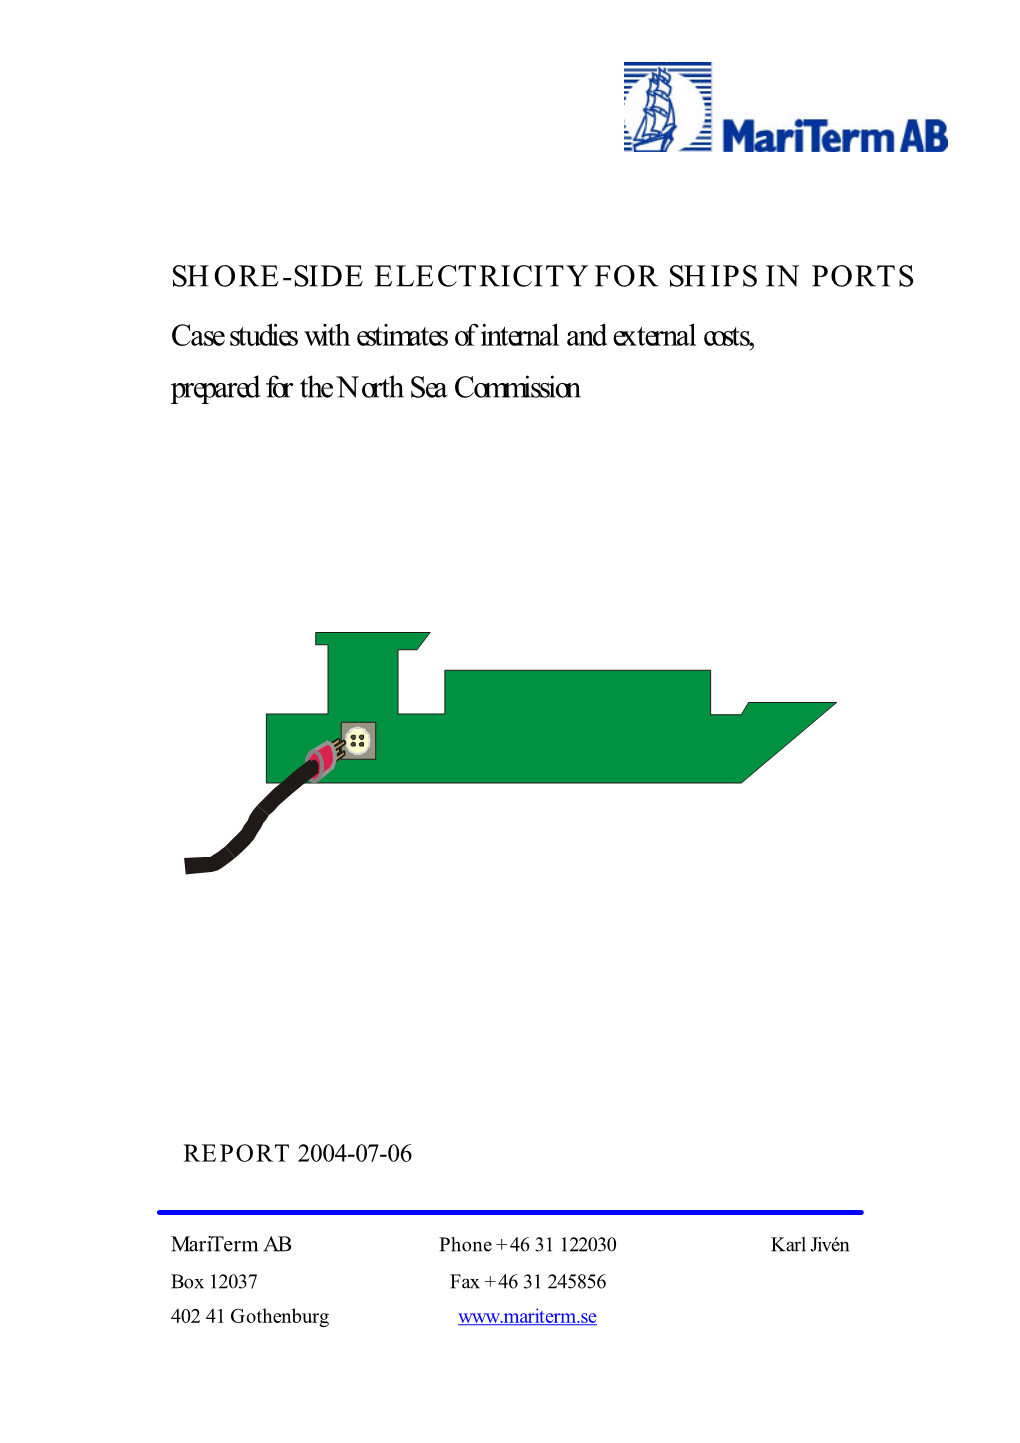 Mariterm; Shore Side Electricity for Ships in Ports